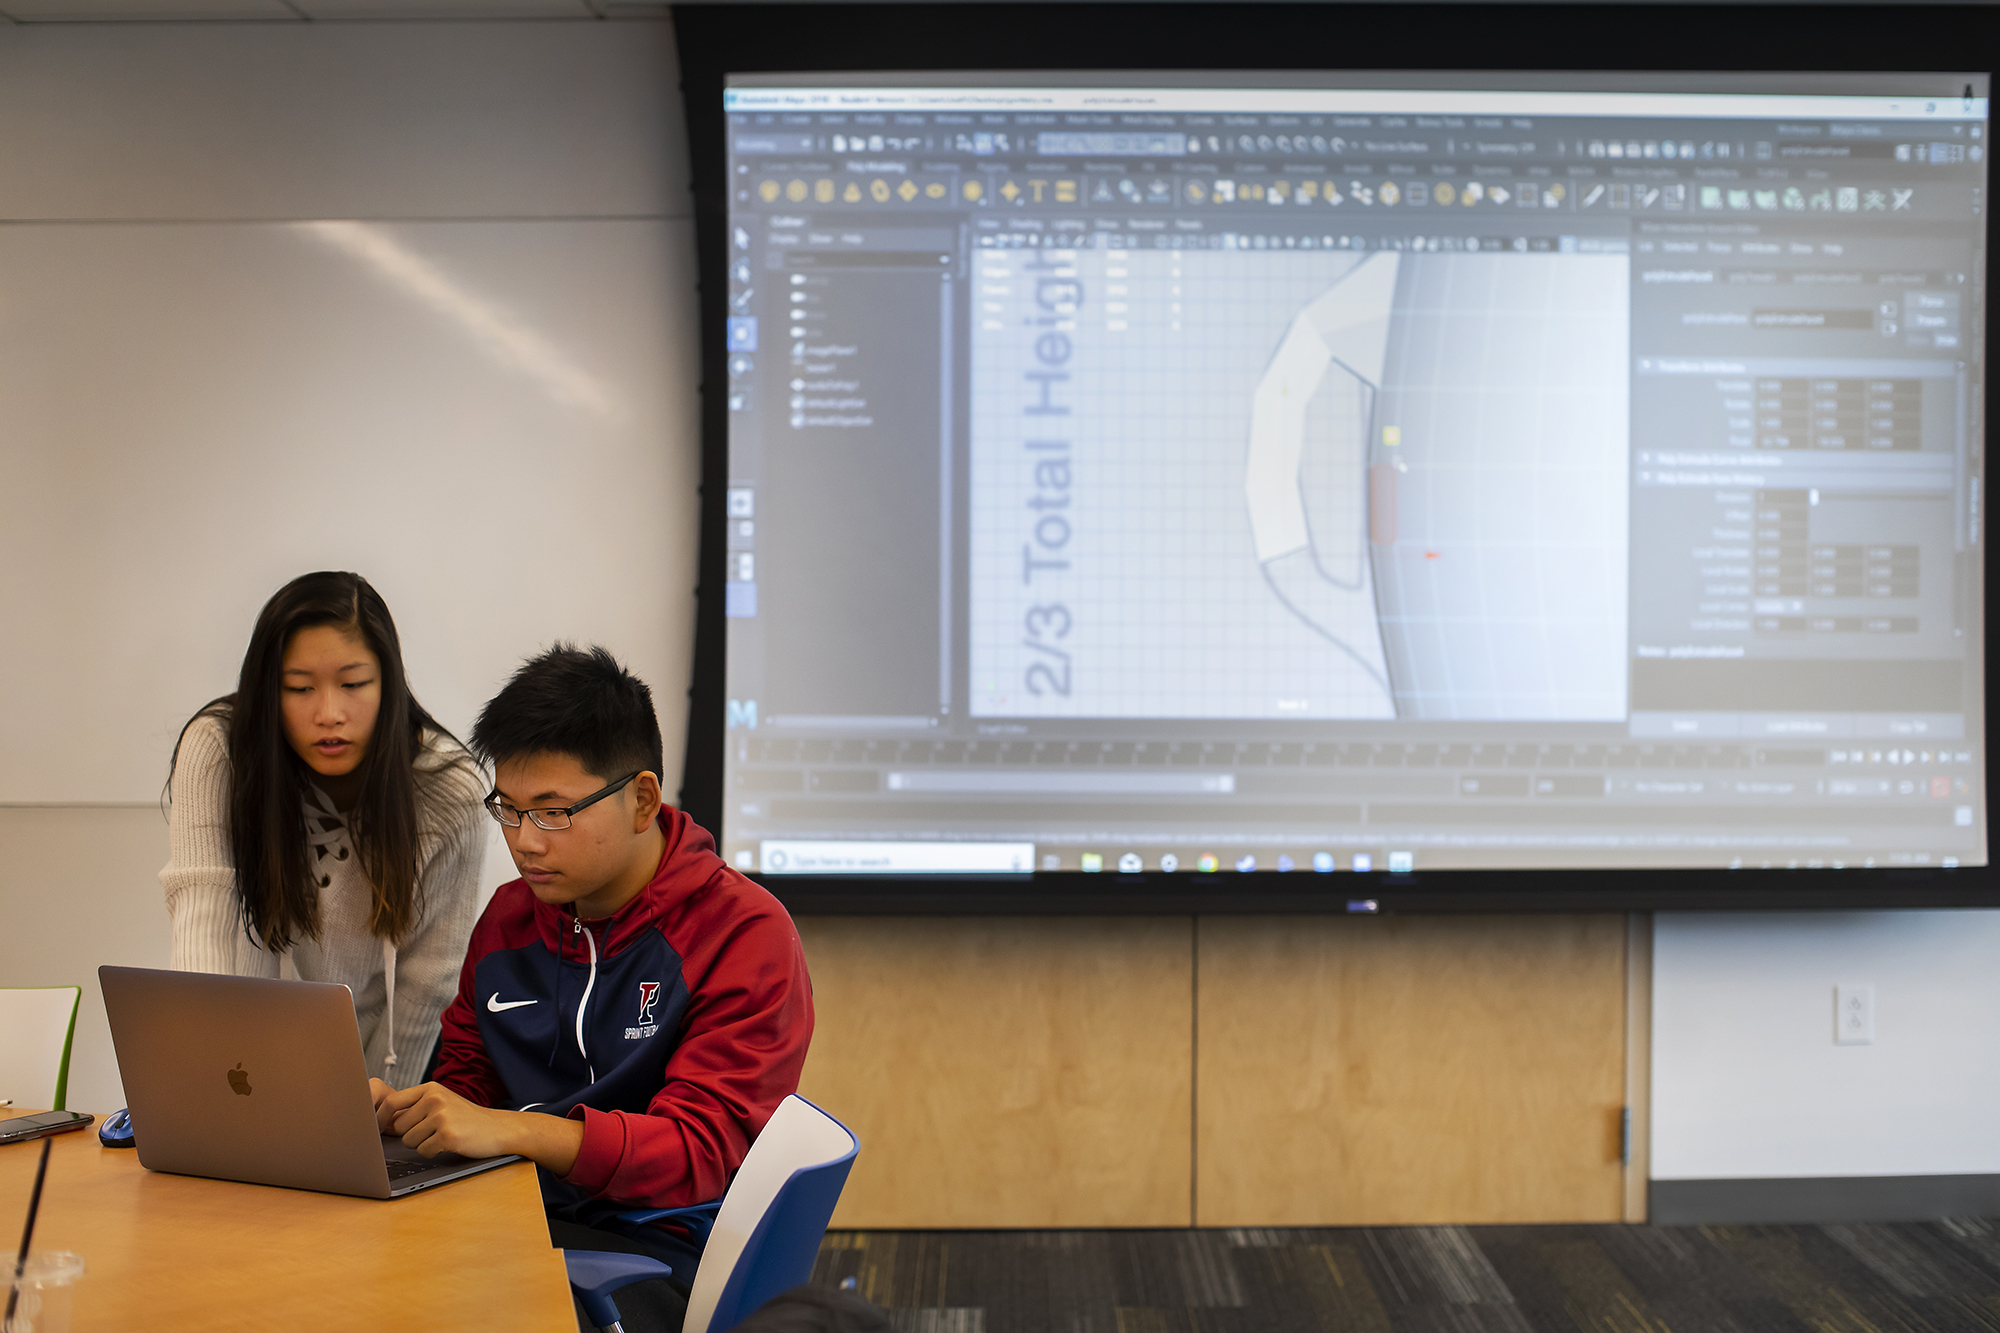 two students working on a laptop with a screen behind them